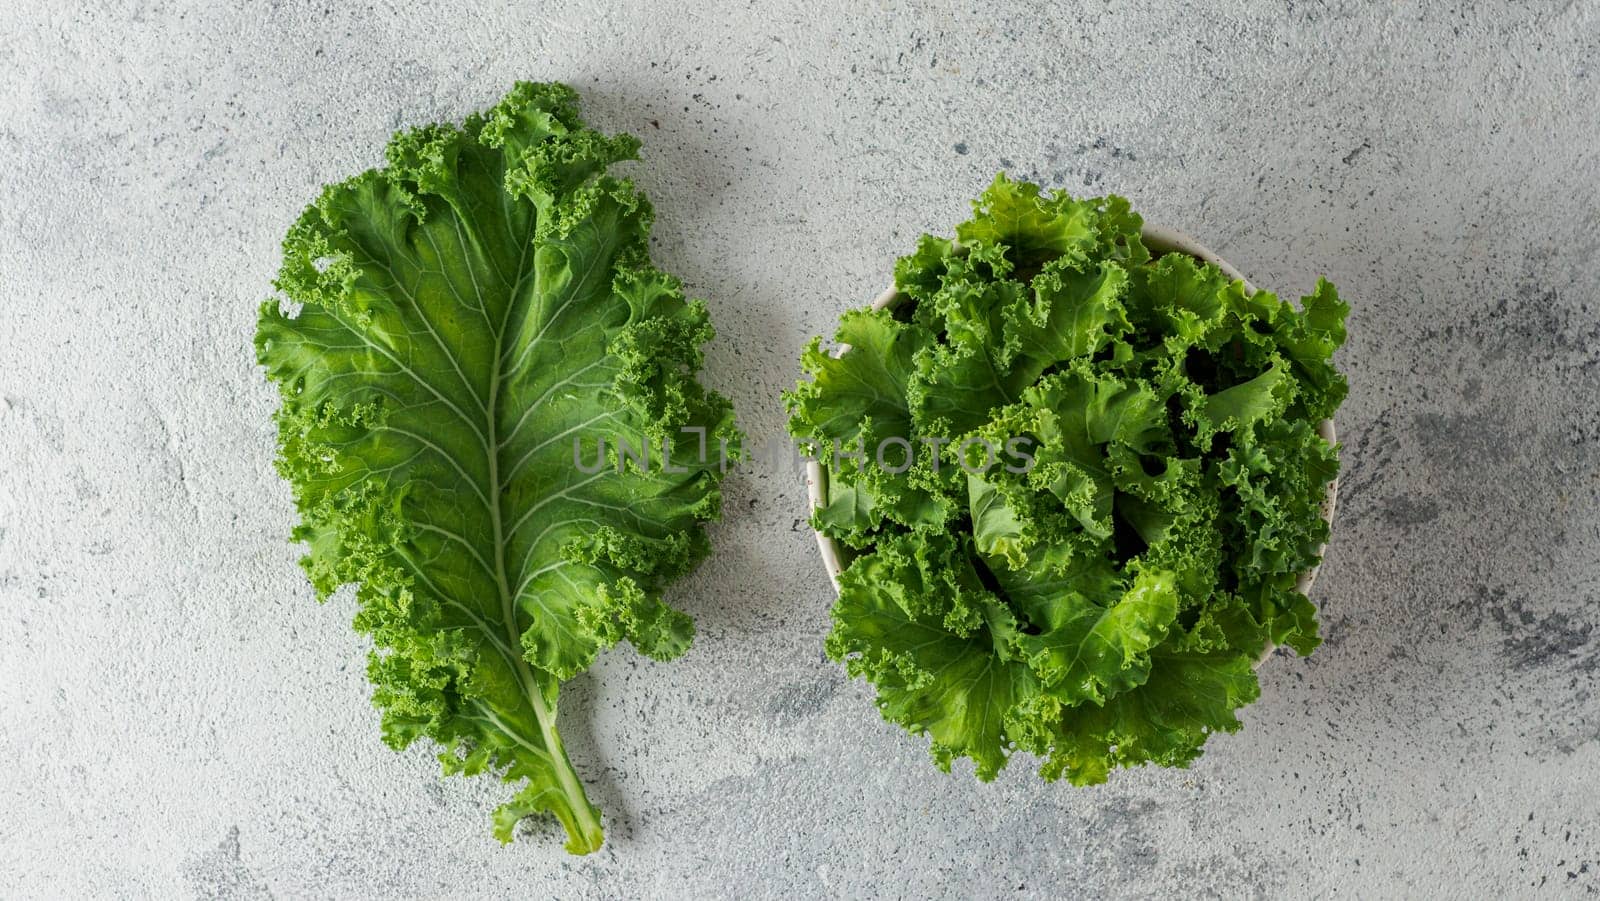 Fresh green kale leaf and salad on gray cement background, top view. Healthy detox vegetables. Clean eating and dieting concept. Flat lay. Health kale benefits